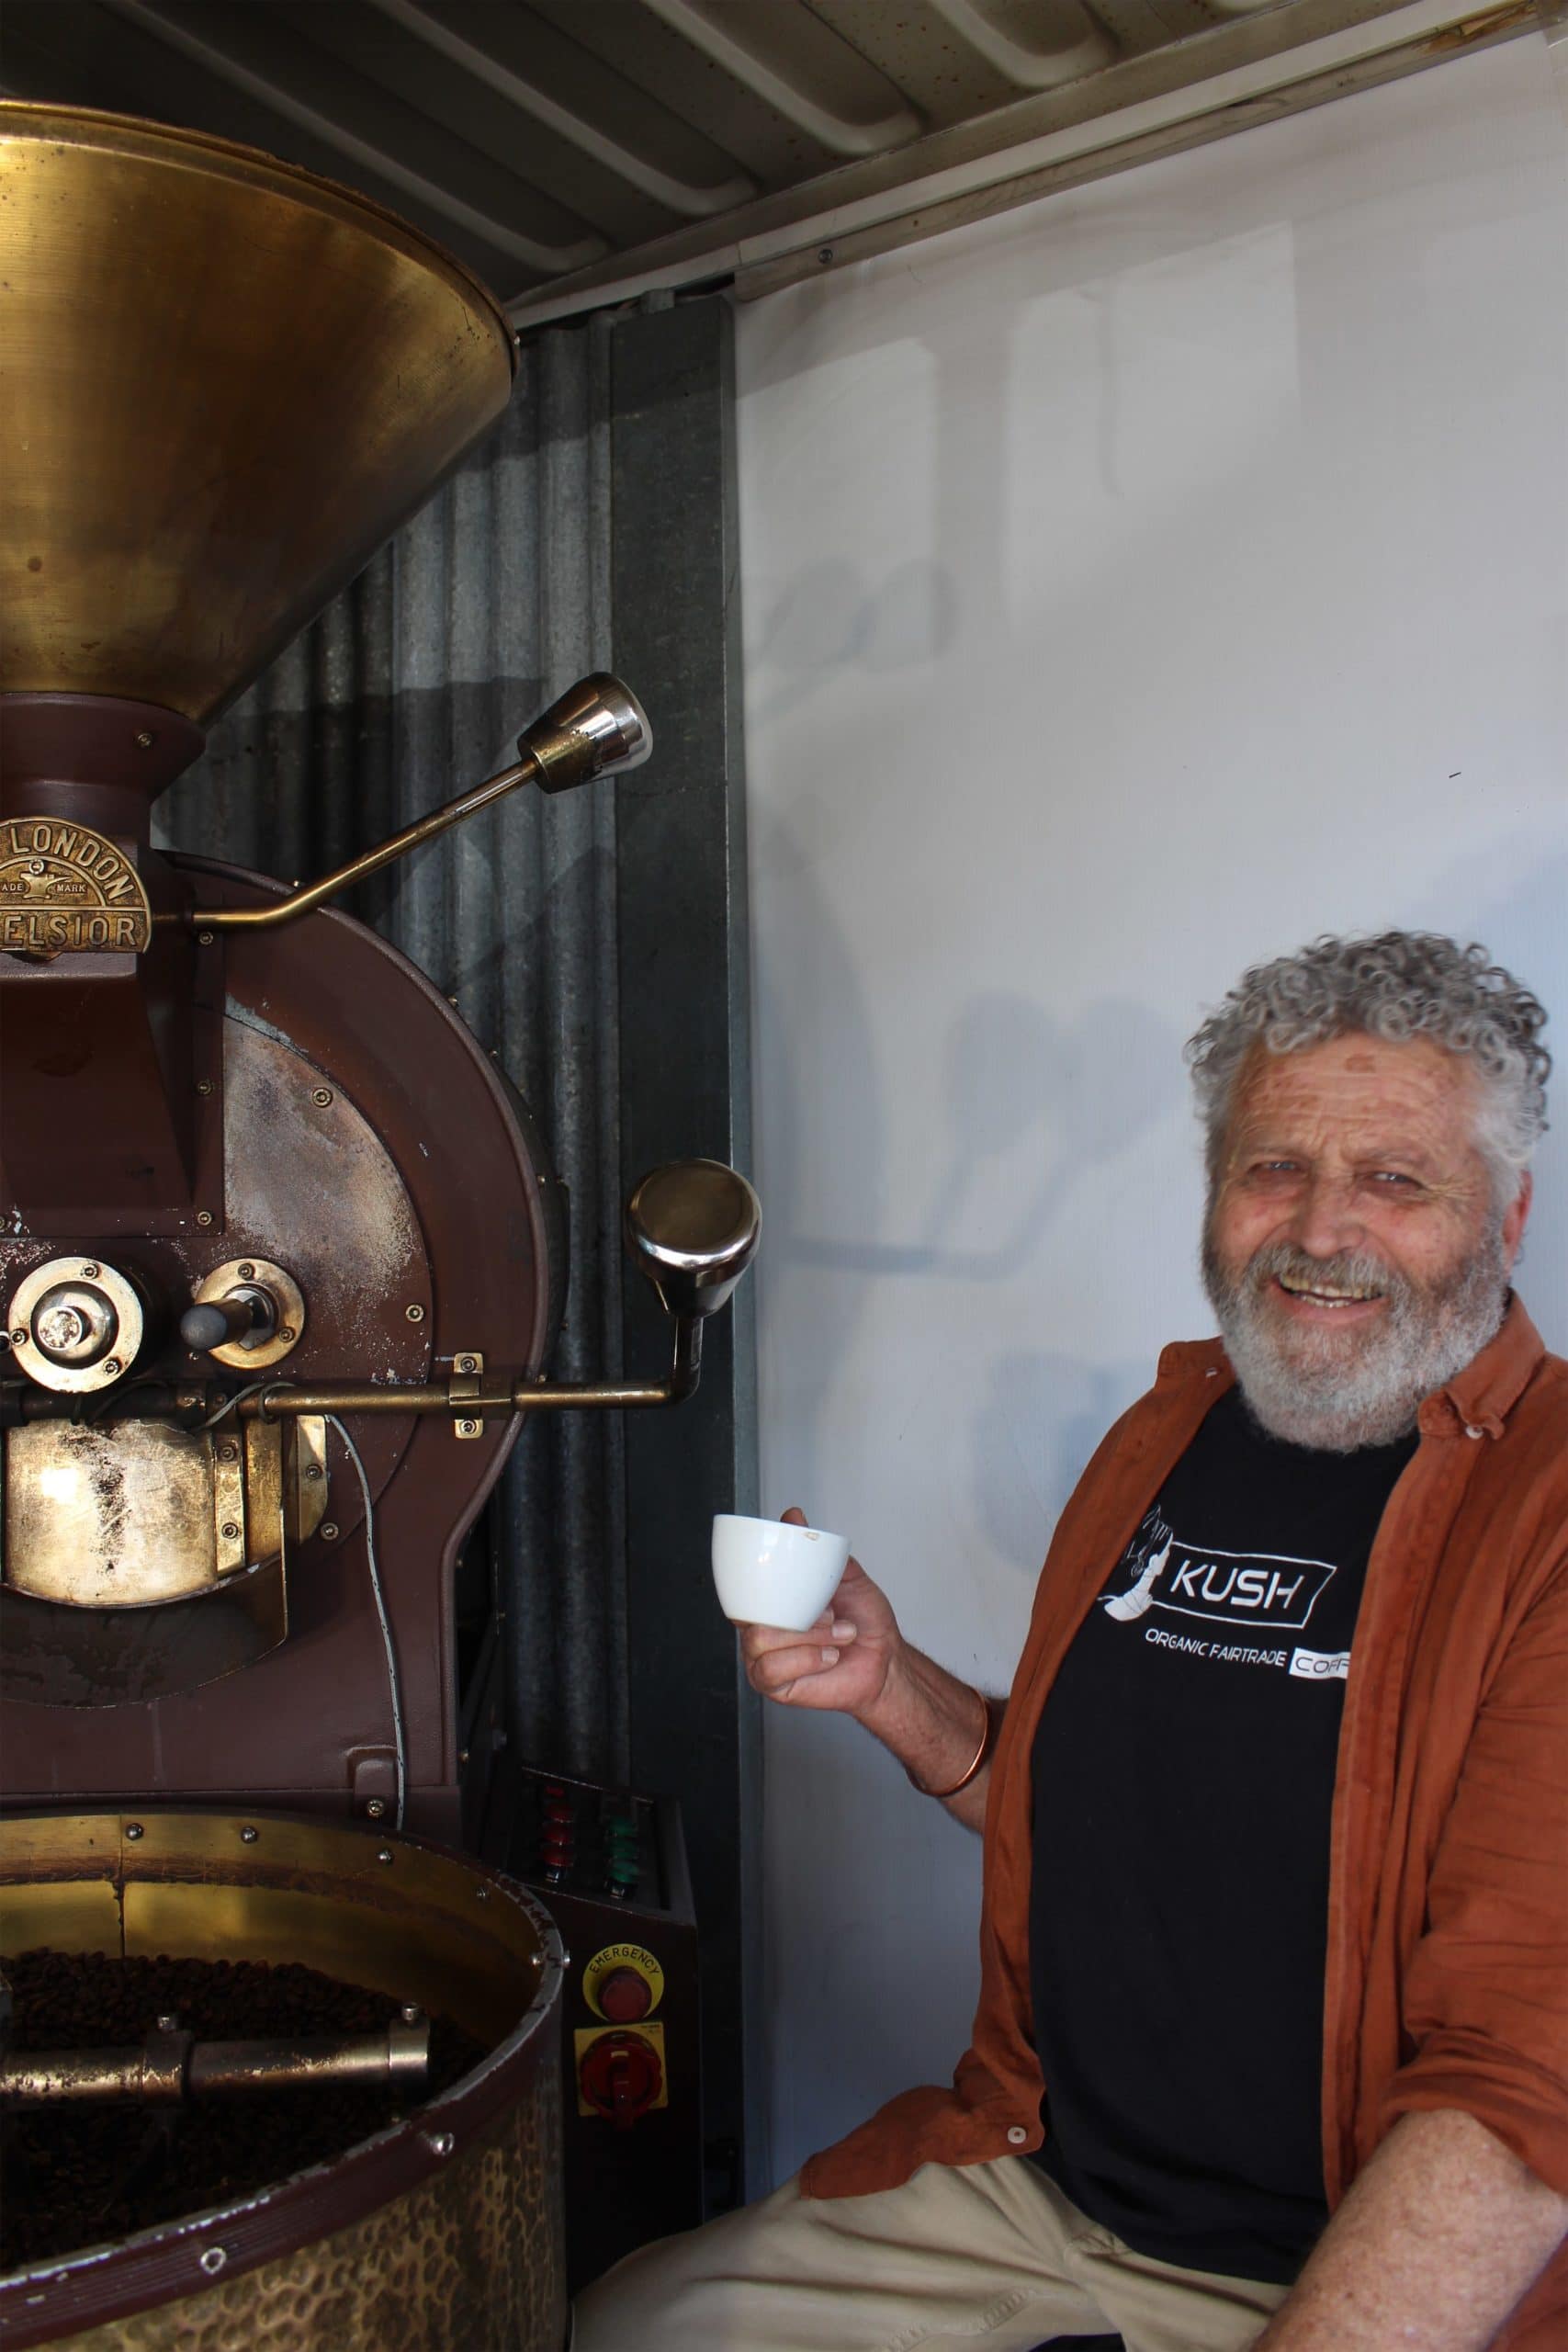 Andy by the coffee roaster